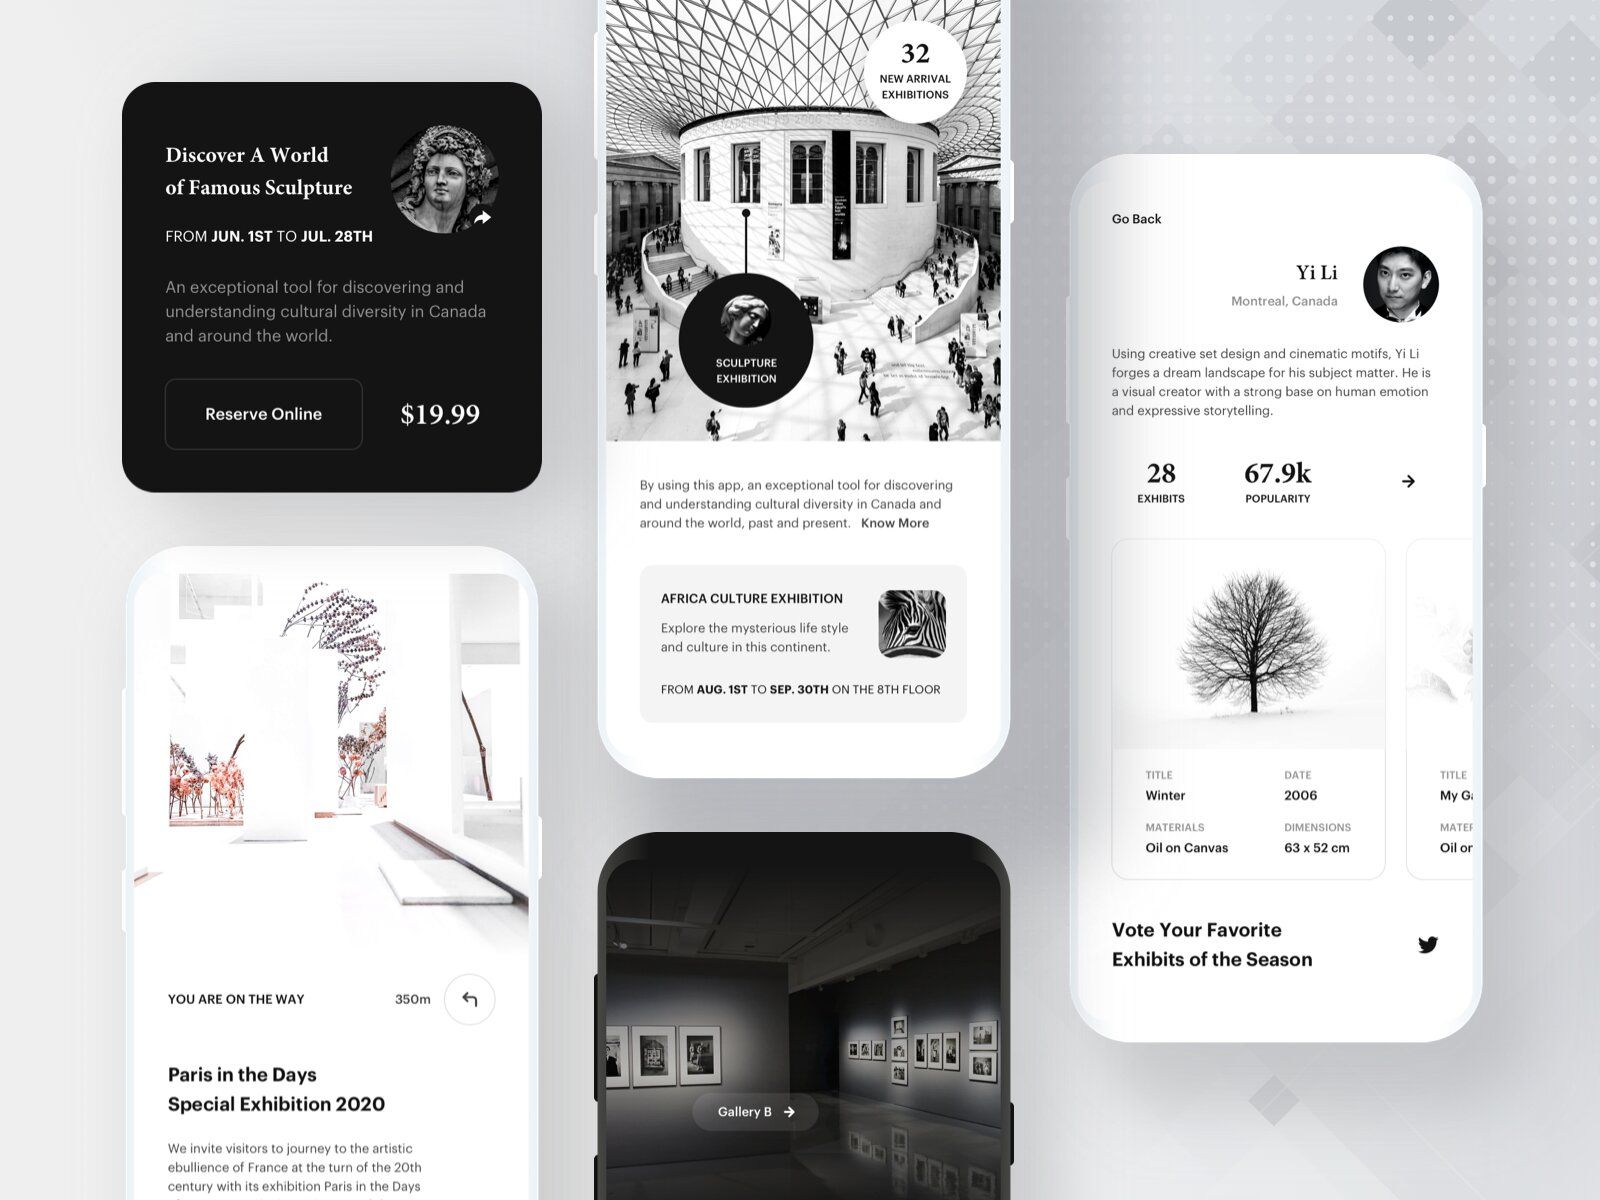 With a museum app, you can replace your paper tour guides with the ones on mobile devices (*image by [Yi Li](https://dribbble.com/coreyliyi){ rel="nofollow" target="_blank" .default-md}*)